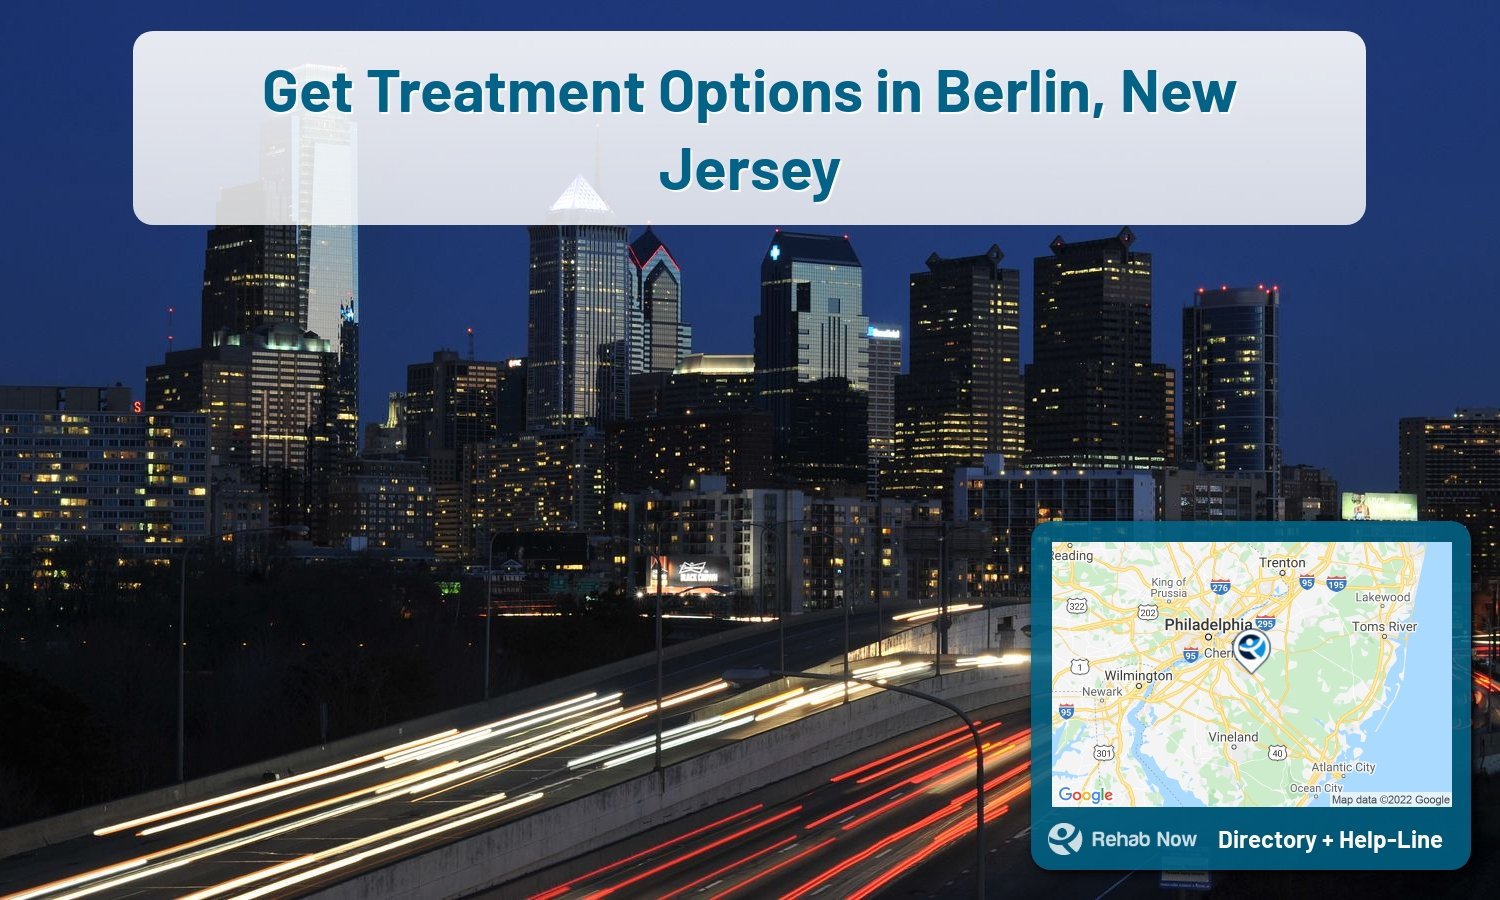 Find drug rehab and alcohol treatment services in Berlin. Our experts help you find a center in Berlin, New Jersey